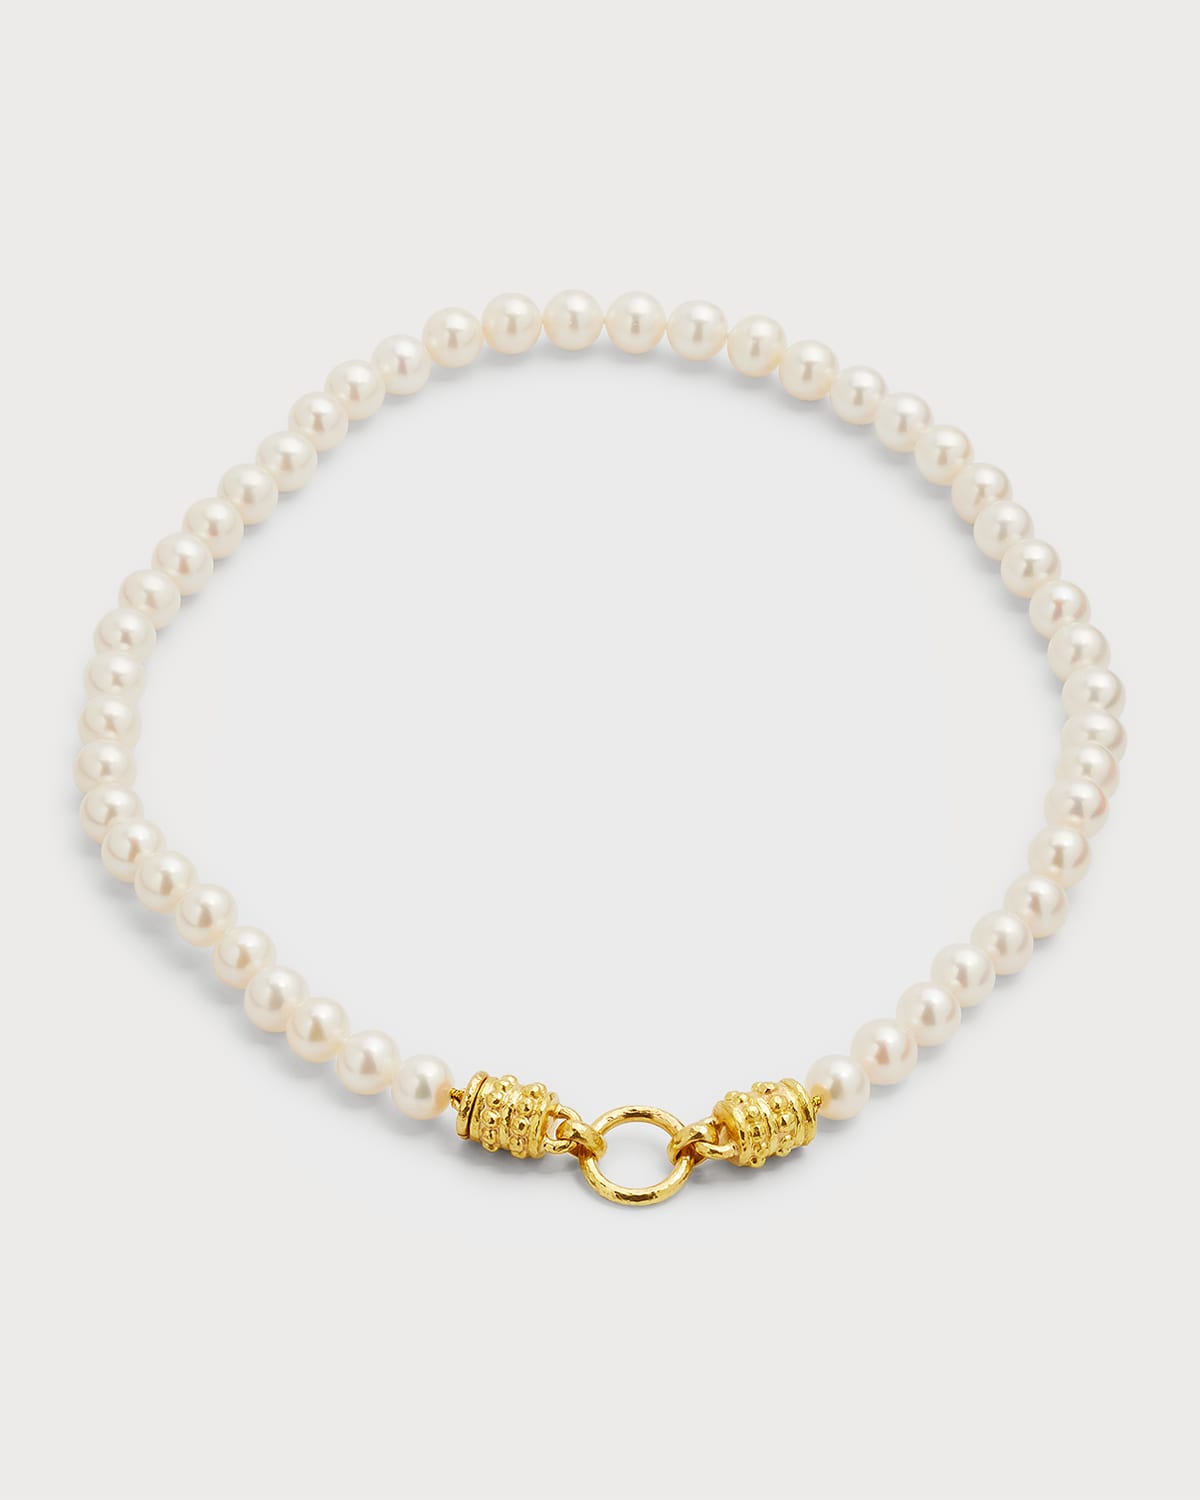 Elizabeth Locke 19K Yellow Gold Freshwater Pearl Necklace with Bettina Clasp